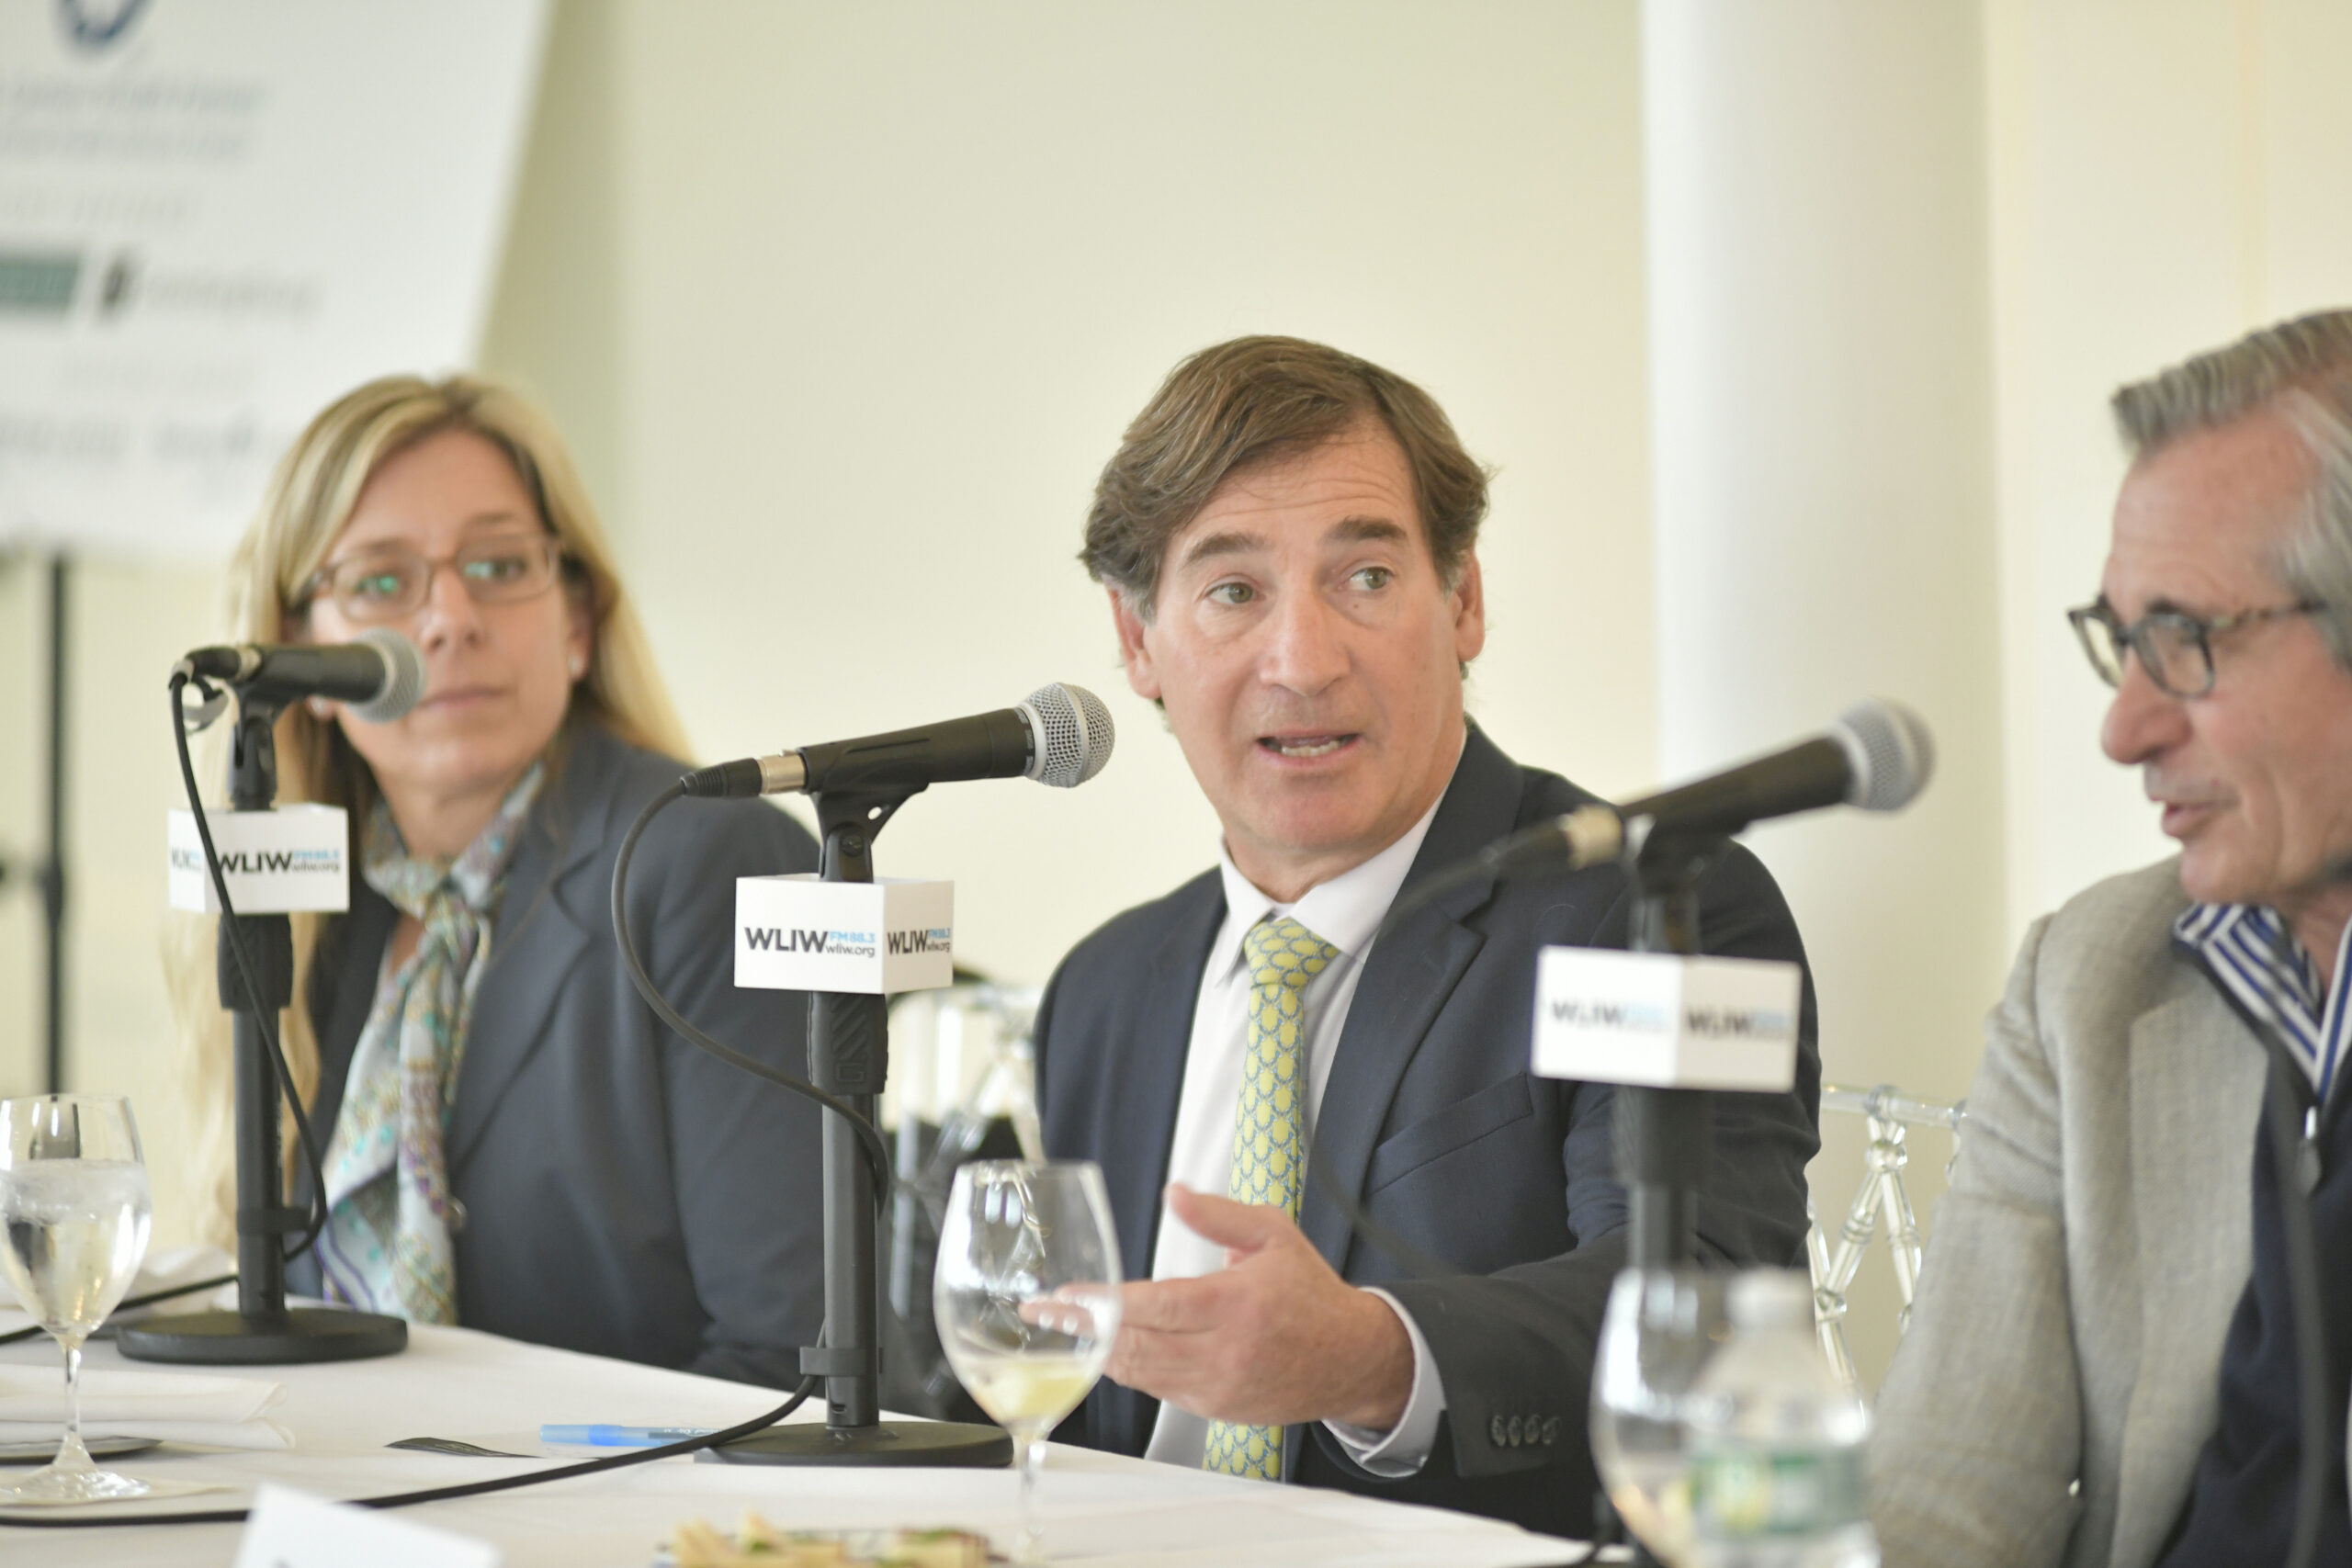 Executive Managing Director at Brown Harris Stevens, panelist Philip O'Connell at the Express Sessions event.  DANA SHAW